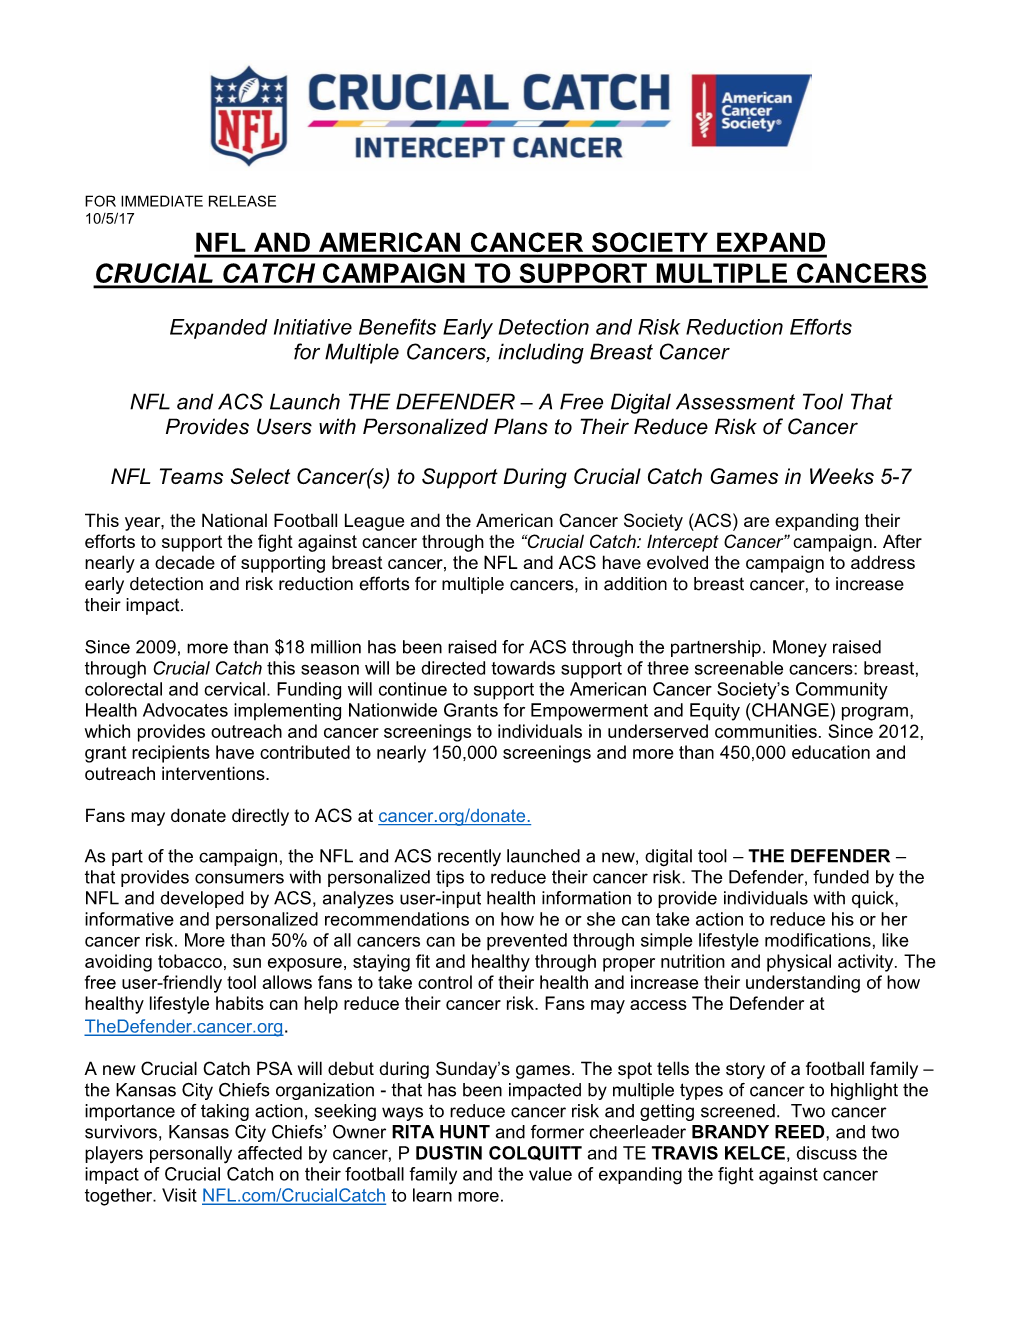 Nfl and American Cancer Society Expand Crucial Catch Campaign to Support Multiple Cancers